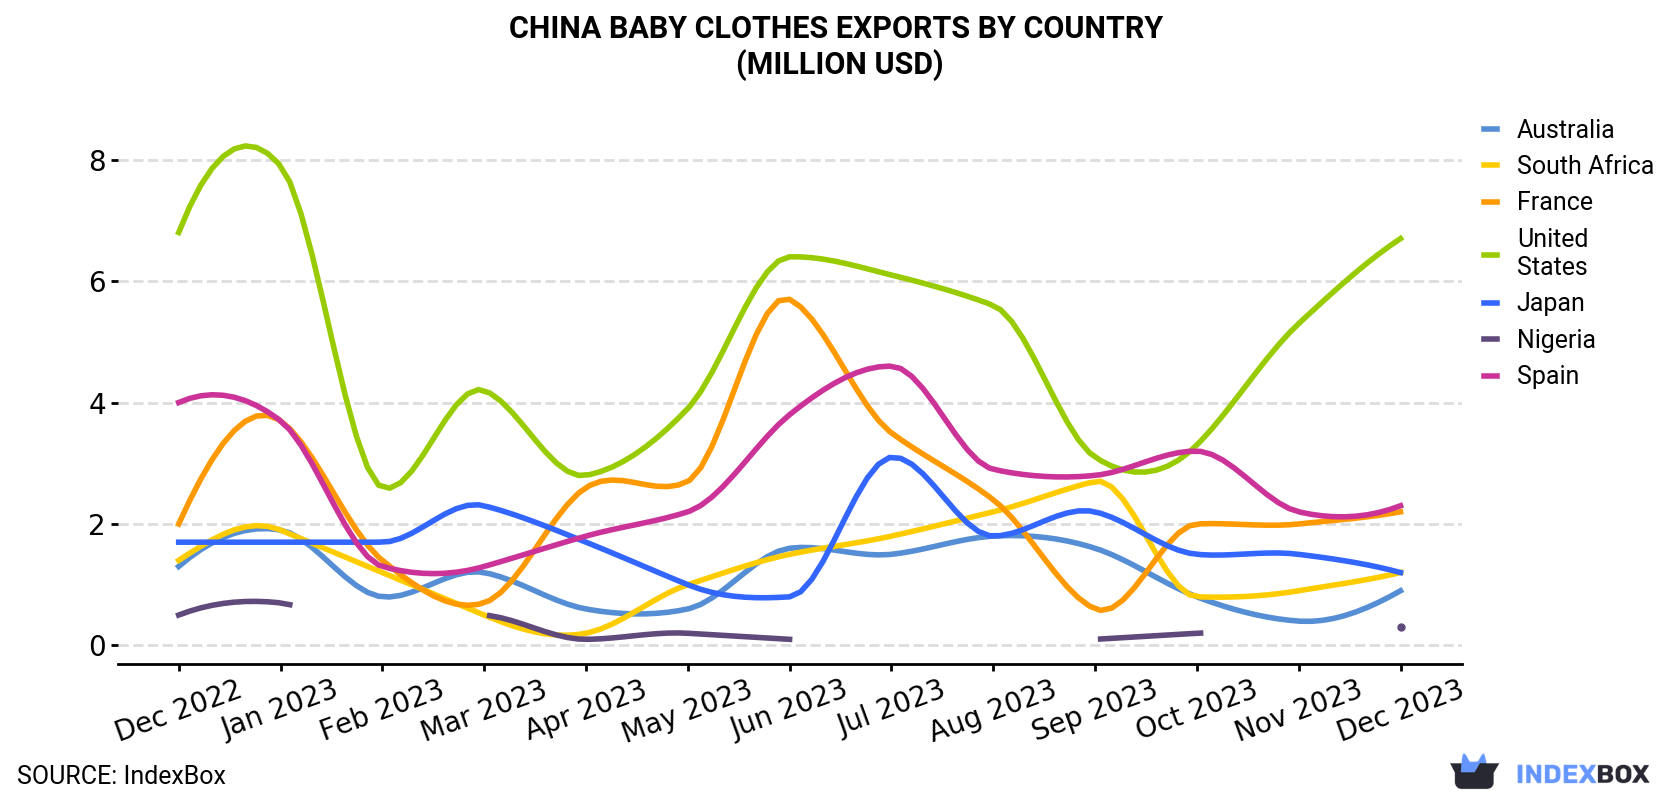 China Baby Clothes Exports By Country (Million USD)